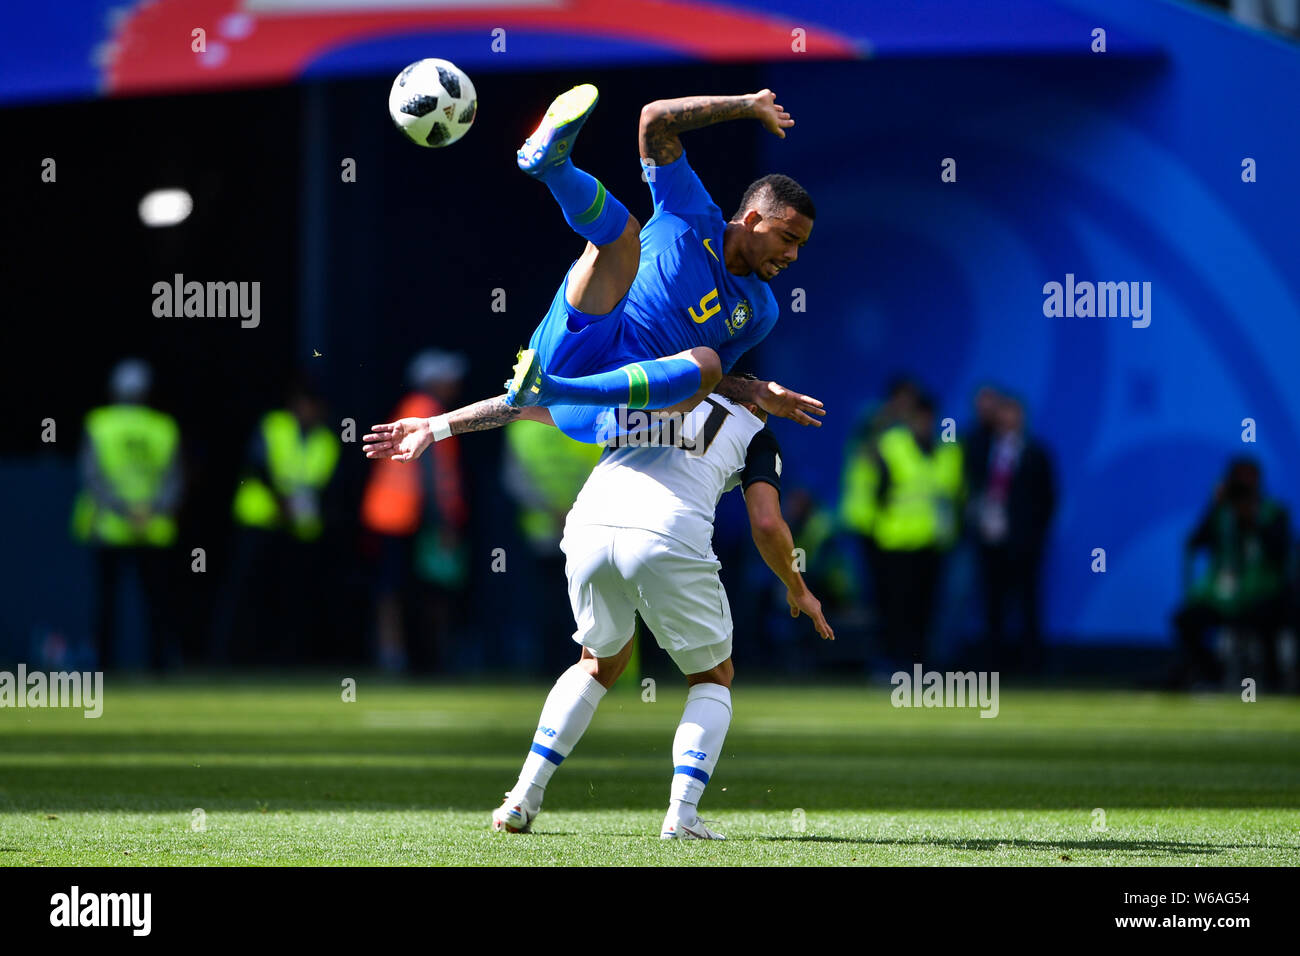 David Guzman, below, of Costa Rica challenges Gabriel Jesus of Brazil in their Group E match during the FIFA World Cup 2018 in Saint Petersburg, Russi Stock Photo